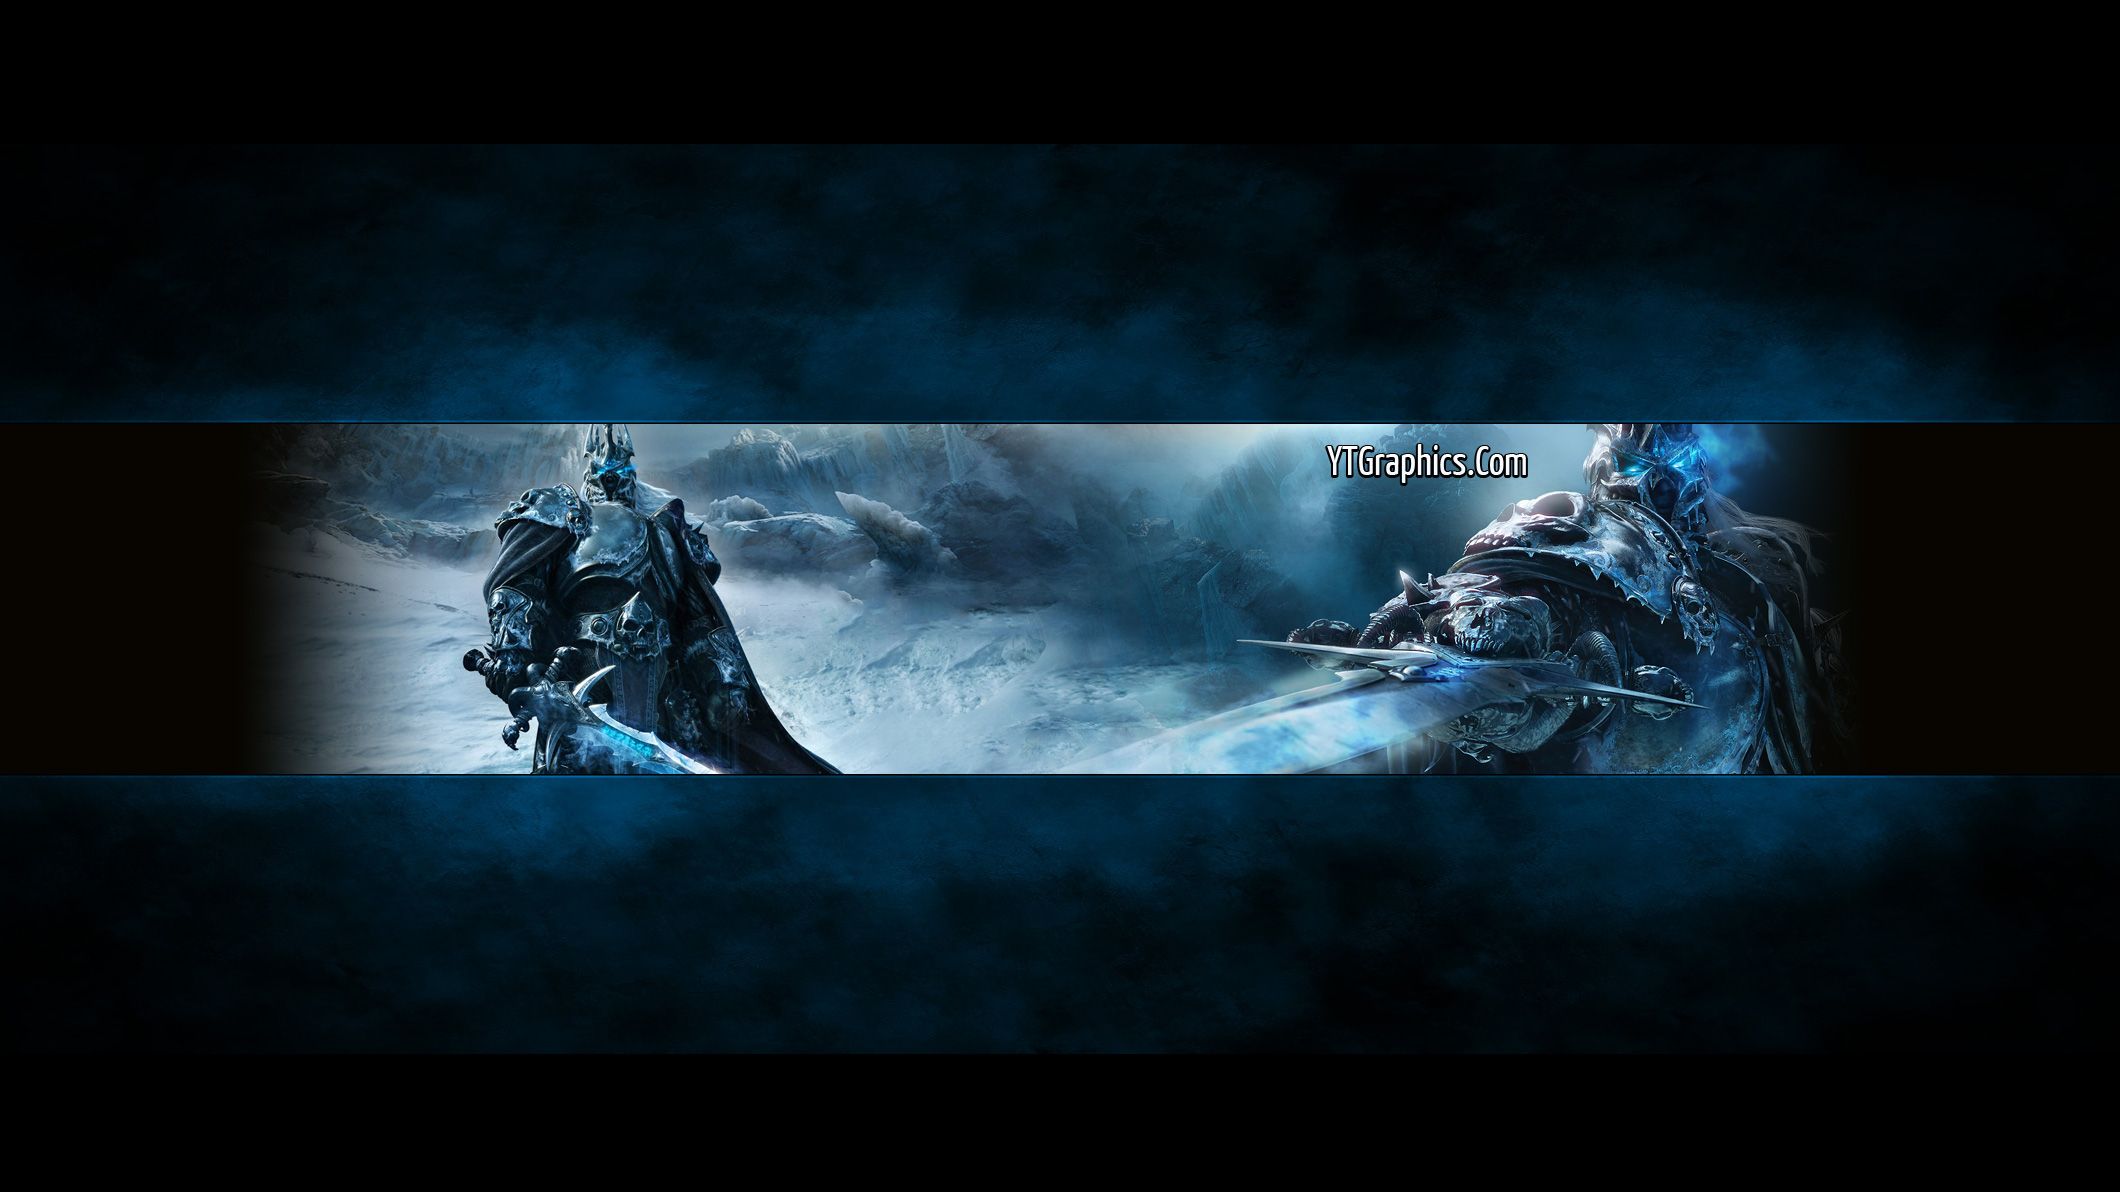 Youtube Backgrounds Gaming